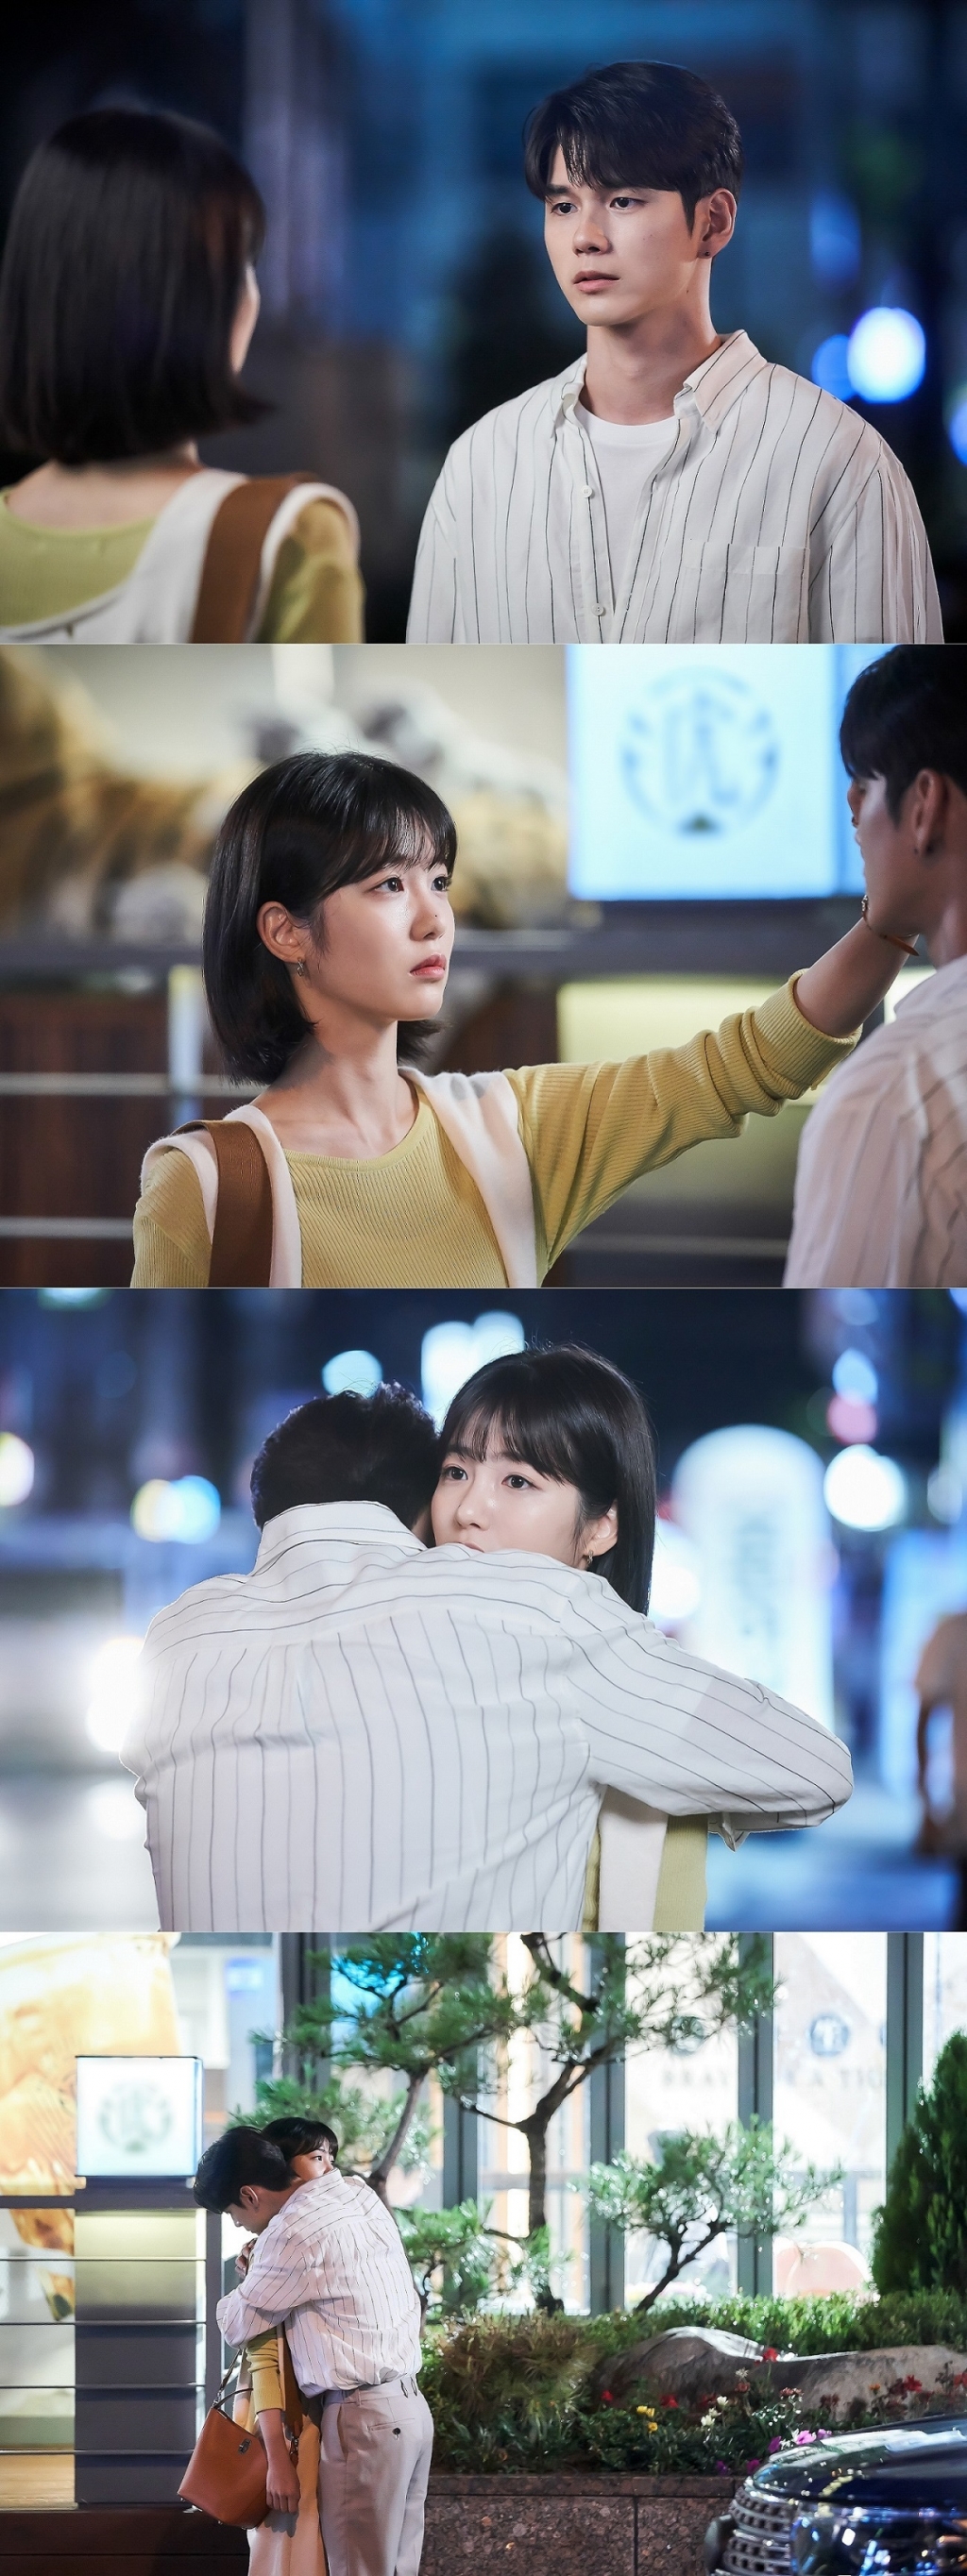 The number of cases Ong Seong-wu finally awakens loveJTBCs gilt drama The Number of Cases (directed by Choi Sung-beom, playwright Cho Seung-hee, and produced by JTBC Studio and content) captured Lee Soo (Ong Seong-wu) hugging Sang-yeon (Shin Ye-eun) on the 17th.Lee Soos fond eyes, which finally awakened his mind, raise his heart rate.In the last broadcast, Lee Soo and On Jun-soo (Kim Dong-joon)s triangular romance began in earnest with the case of Yeon-yeon.When he began to abandon his crush on Woo Yeon Yi, Lee Soo realized that his mind was heading to the case.However, I was jealous of the relationship between the case and the on-junsu without knowing that the heart was love.On Jun-su, meanwhile, went straight to Woo Yeon-yeon.Woo Yeon Yi, who has always been a bad love, tried to reject his heart, and he approached the case to make himself a test man.Lee Soo was saddened by the affection of Woo Yeon Yi On Junsu, who misunderstood his mind every time, and eventually caught the case.However, in the case of Lee Soos question, What if I am serious, Yeon turned around with only the answer Do not make a drink.Lee Soo, who is completely reversed, is stimulating interest in the relationship between Lee Soo and the case, and Lee Soo, who embraces the case, amplifies the excitement.Lee Soo, who came to the scene with a complicated and confused face. Soon after, he hugs the case.In the case of Lee Soos behavior, which is different from usual, Yeon can not hide his surprise. Lee Soos behavior change, which defined the relationship between the two as friends, raises curiosity.In the sixth episode of The Number of Cases broadcast today (17th), Lee Soo is properly aware of his mind toward Yeon.Between the two men who apply for a date on their birthday, Yeon will be in the crossroads of choice.Especially, Lee Soo, who realized his favorite mind, starts straight, and the relationship between Lee Soo and the case, which is clearly reversed, stimulates the excitement.The production team of The Number of Cases said, Lee Soo, who has been stuck with the calligraphy photo book, and the time of the case become a catalyst to change their relationship.The story of two people who are mixed with beautiful scenery throughout Seoul gives excitement and healing. Please expect Lee Soo, who will be in a decisive change, and the romance of On Junsu. 